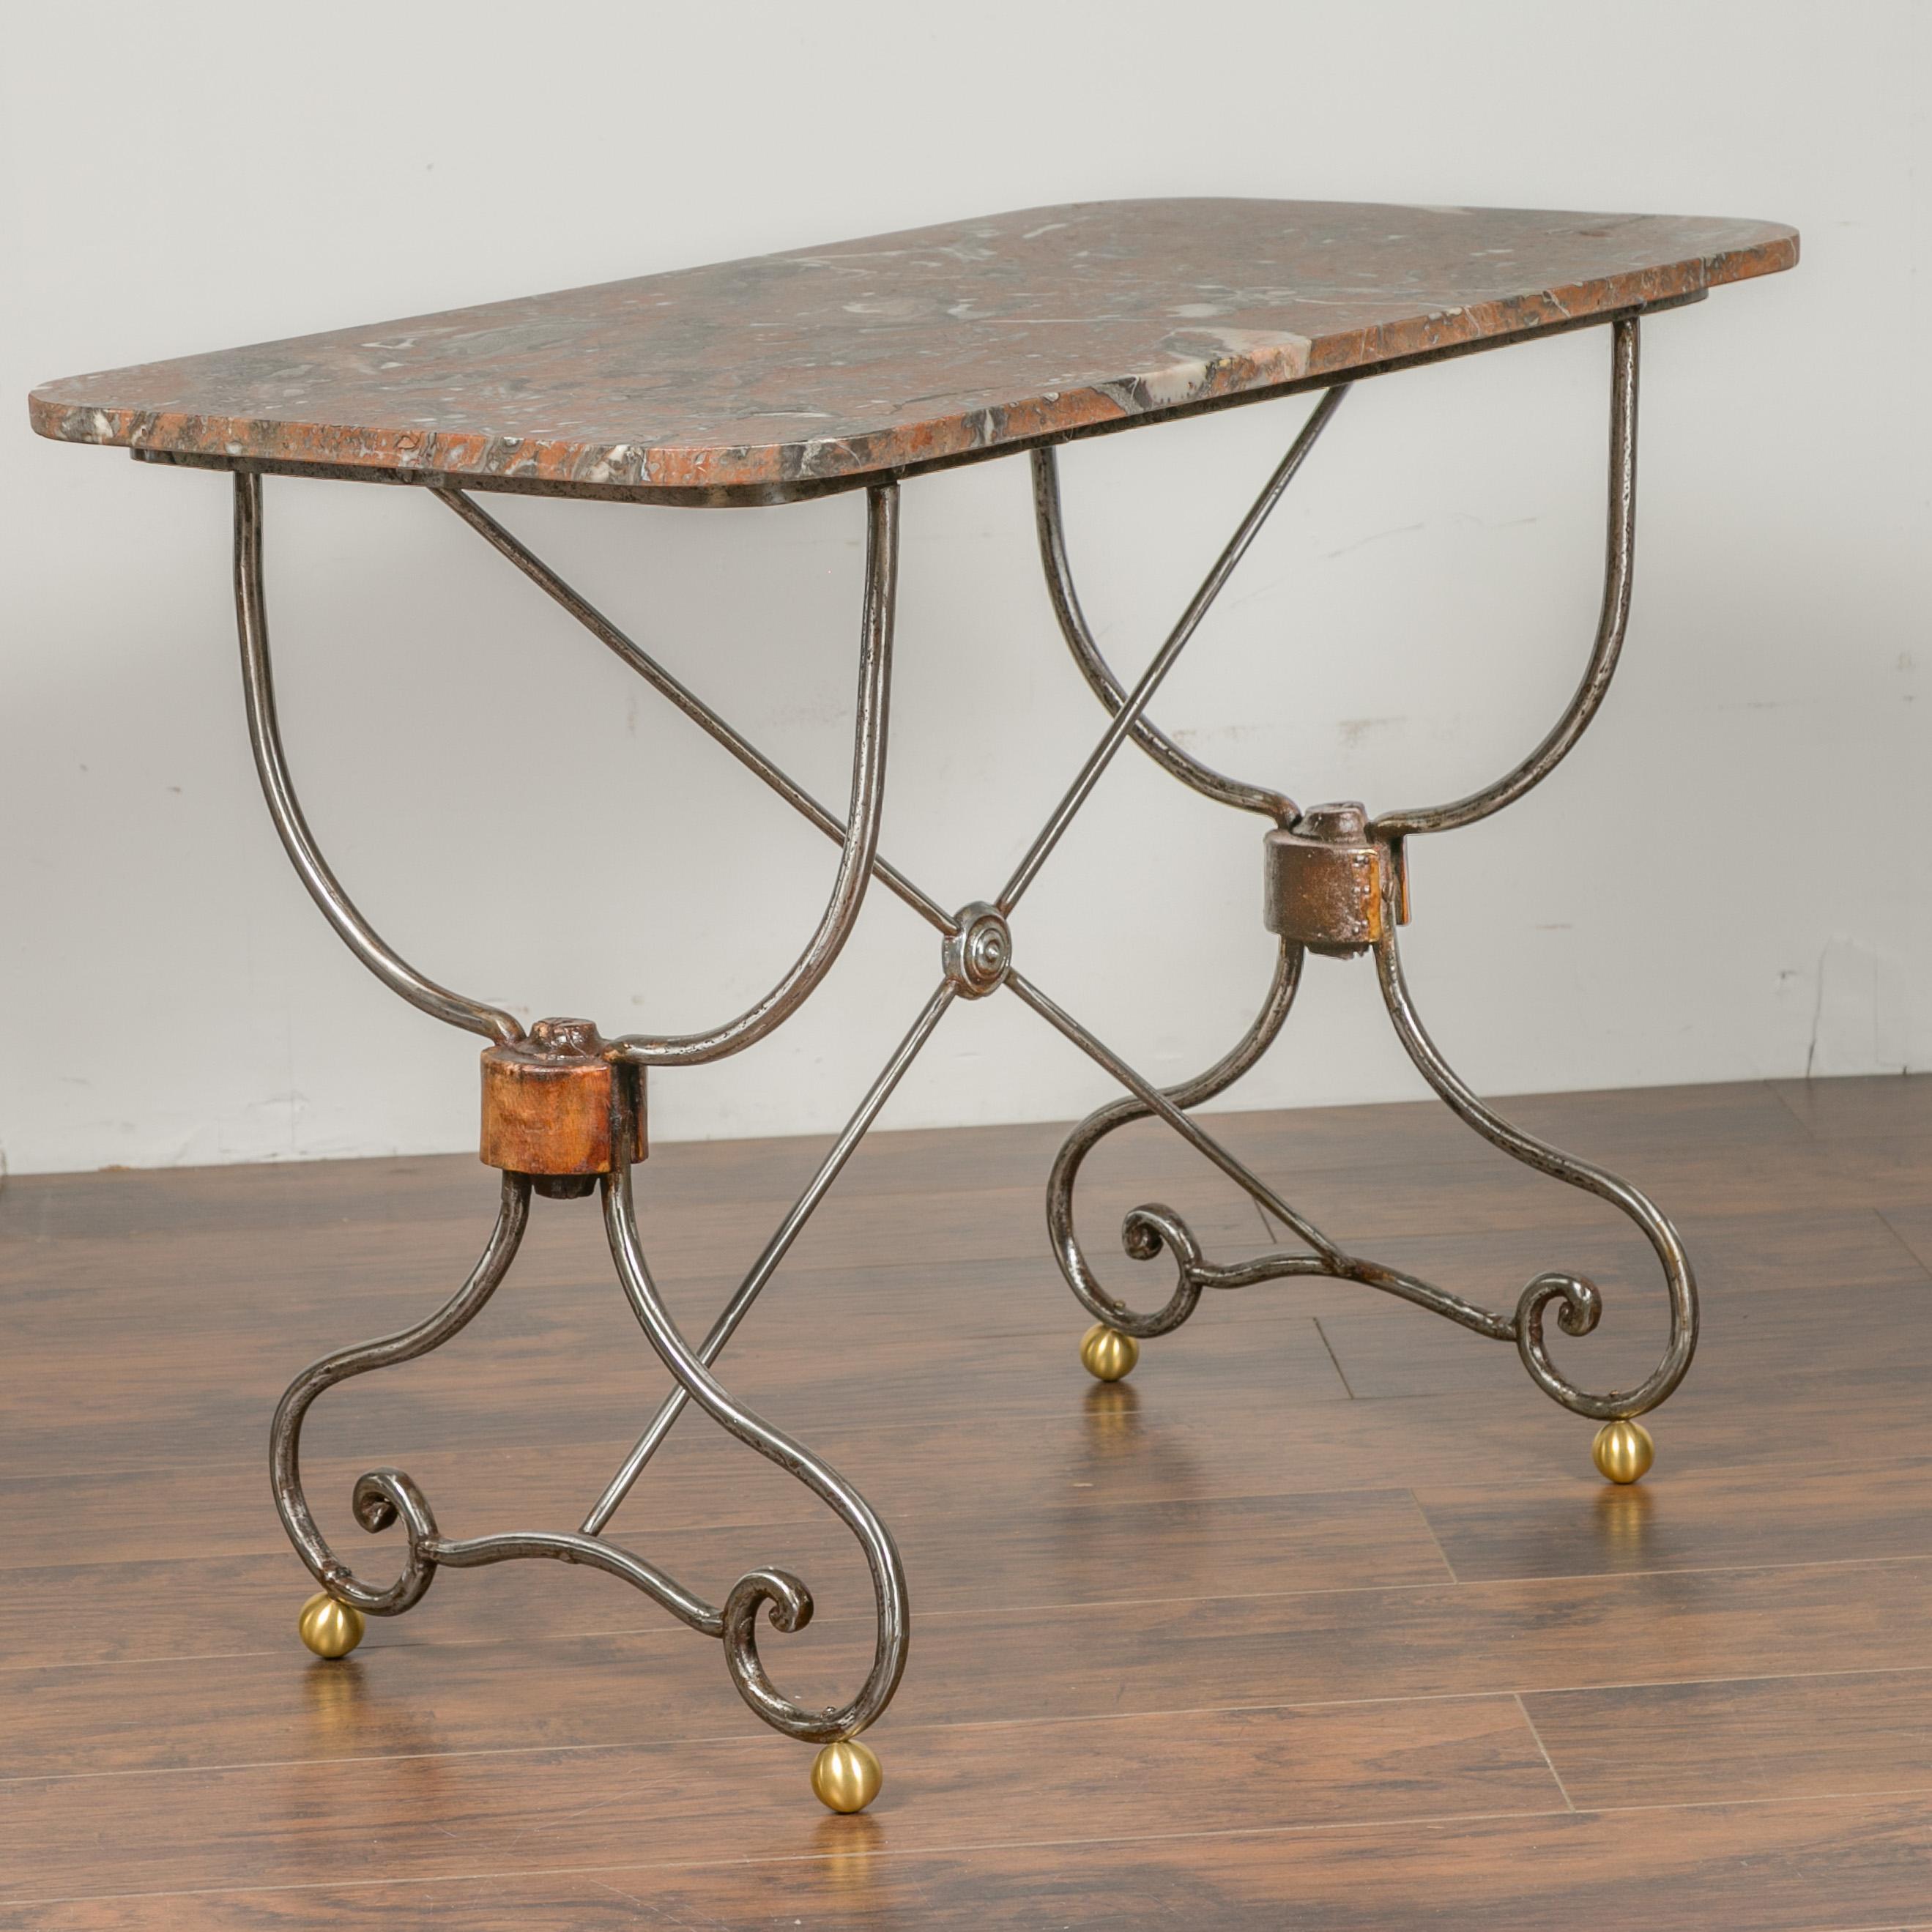 A French steel and brass console table from the early 20th century, with variegated marble top and scrolling feet. We have a twin table available, see item LU836719327322 should you need a pair. They are priced and sold individually. Born in France